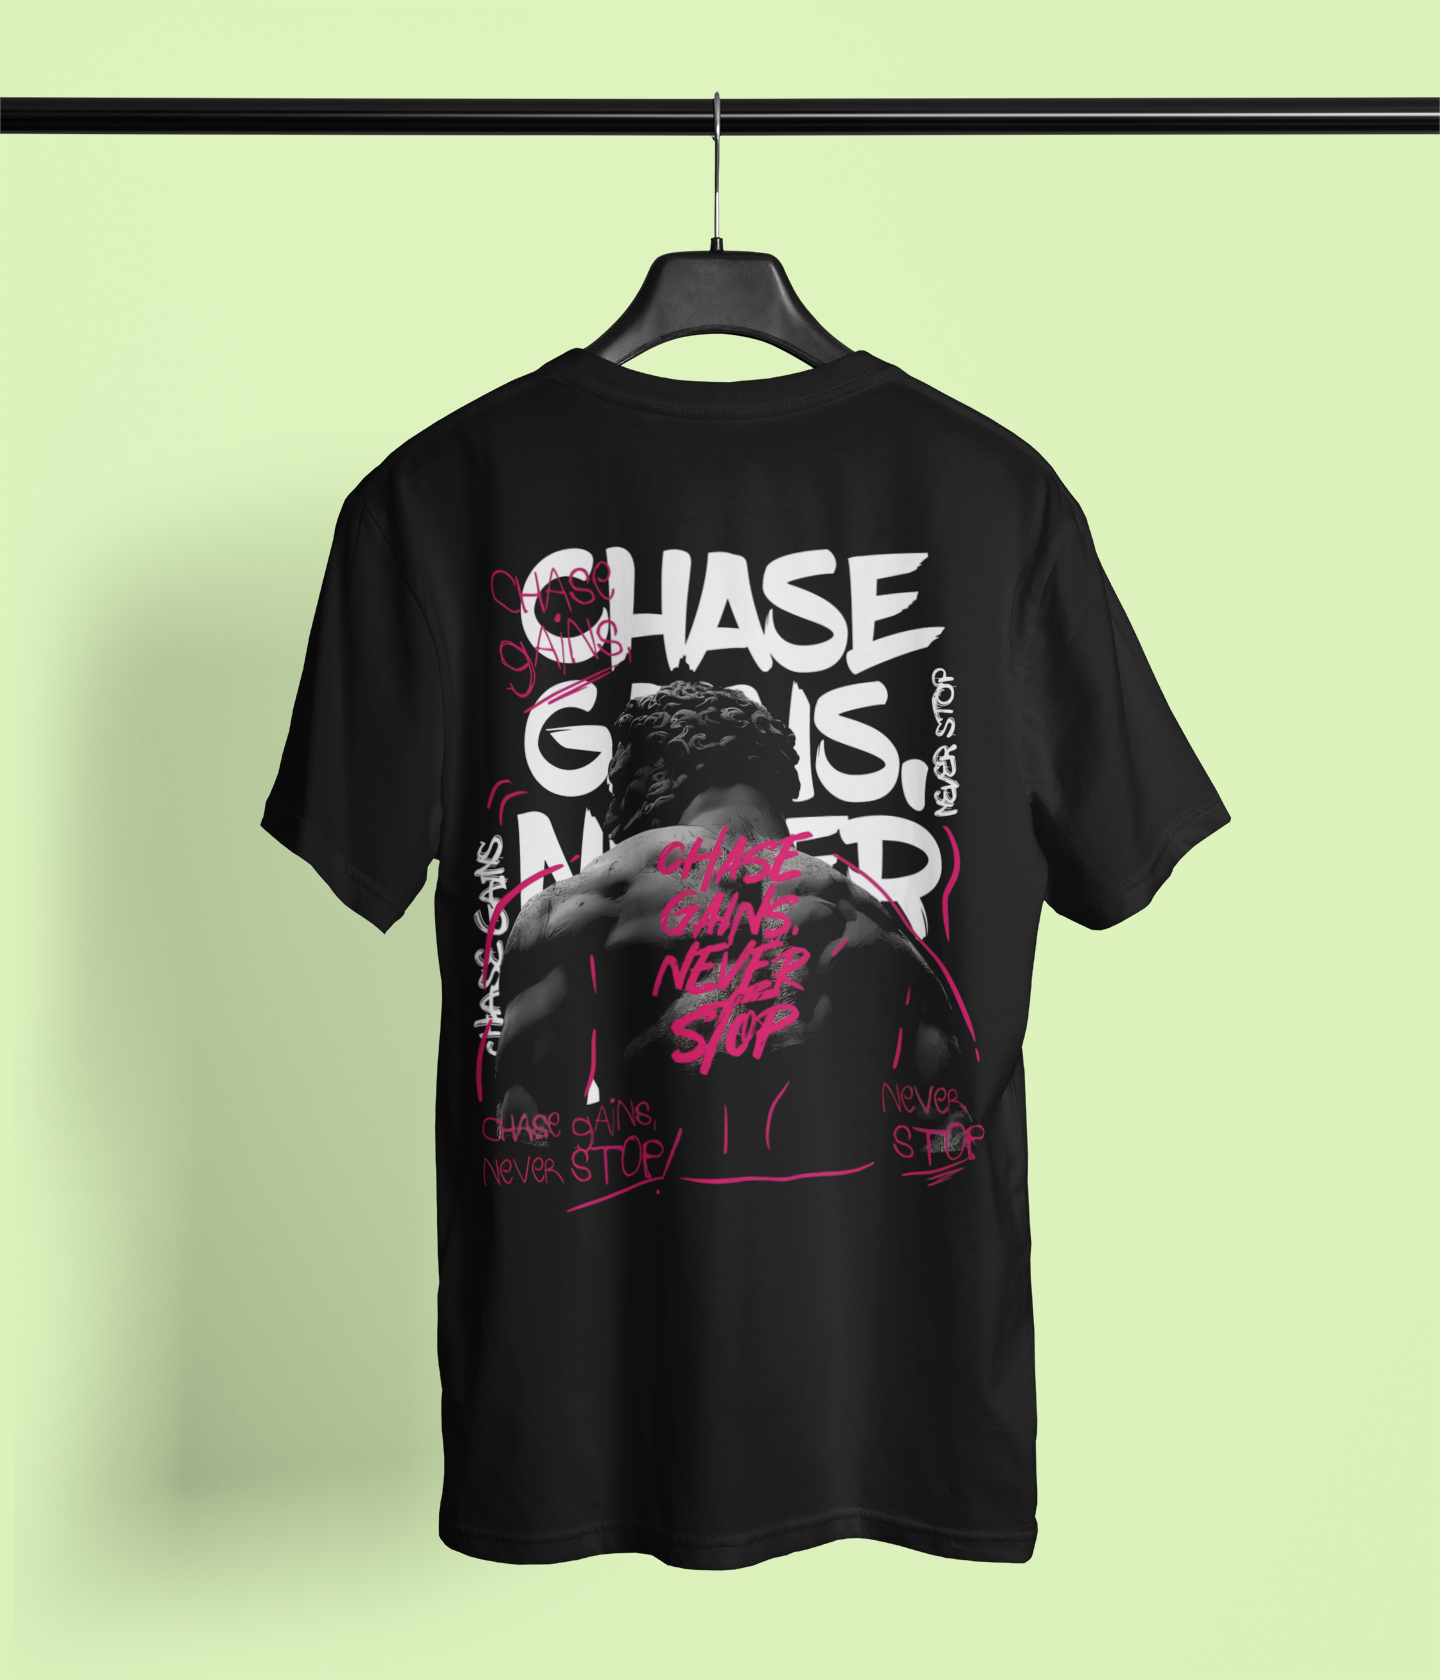 Chase Gains Never Stop - Black - Gym Oversized T Shirt Strong Soul Shirts & Tops